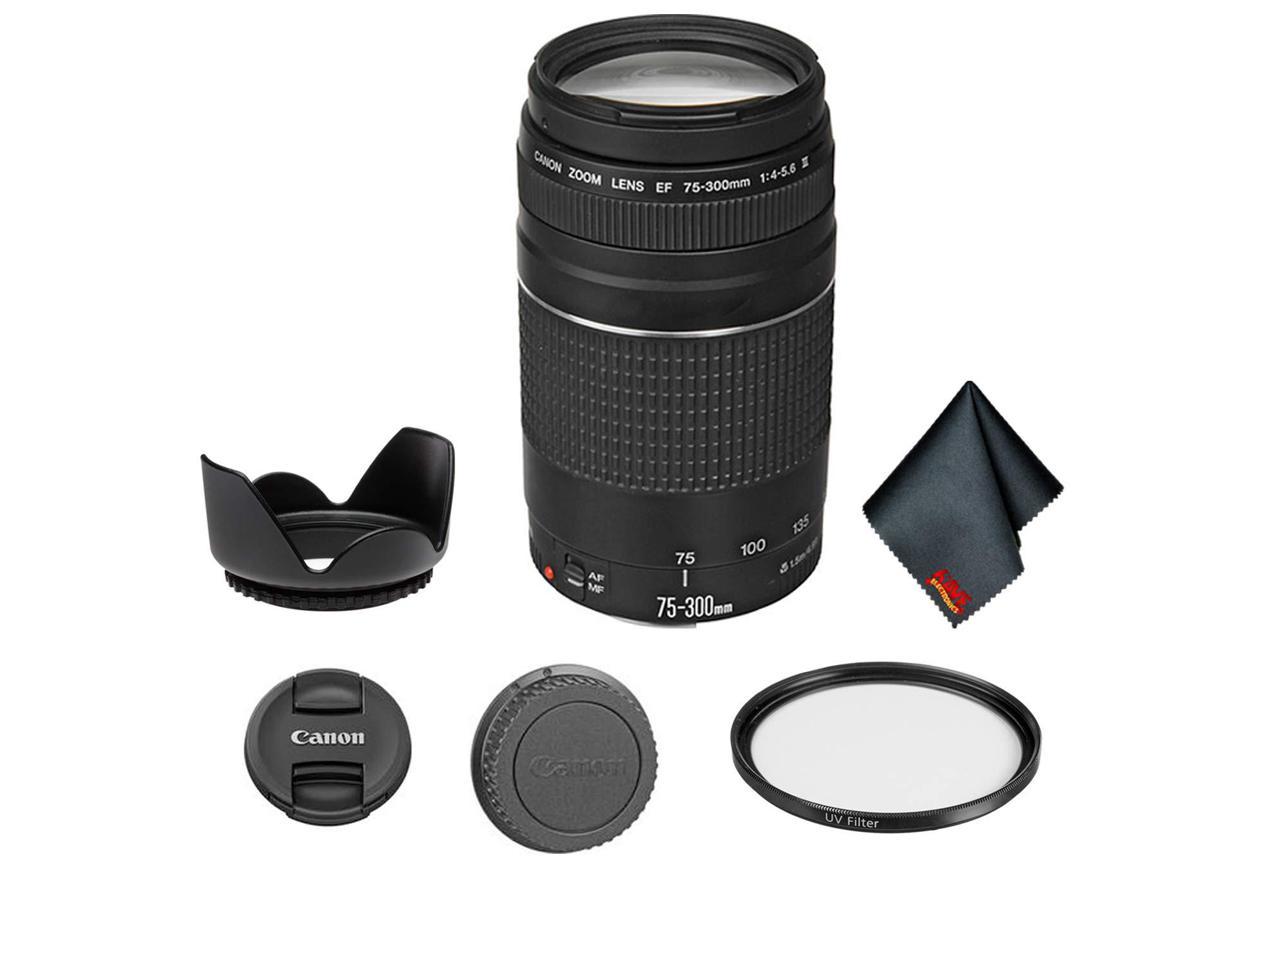 Canon EF 75-300mm f/4-5.6 III Telephoto Zoom Lens 6473A003 Bundle with Tulip Lens Hood Filter Kit+ Lens Case Telephoto Lens More Wide Angle Lens 